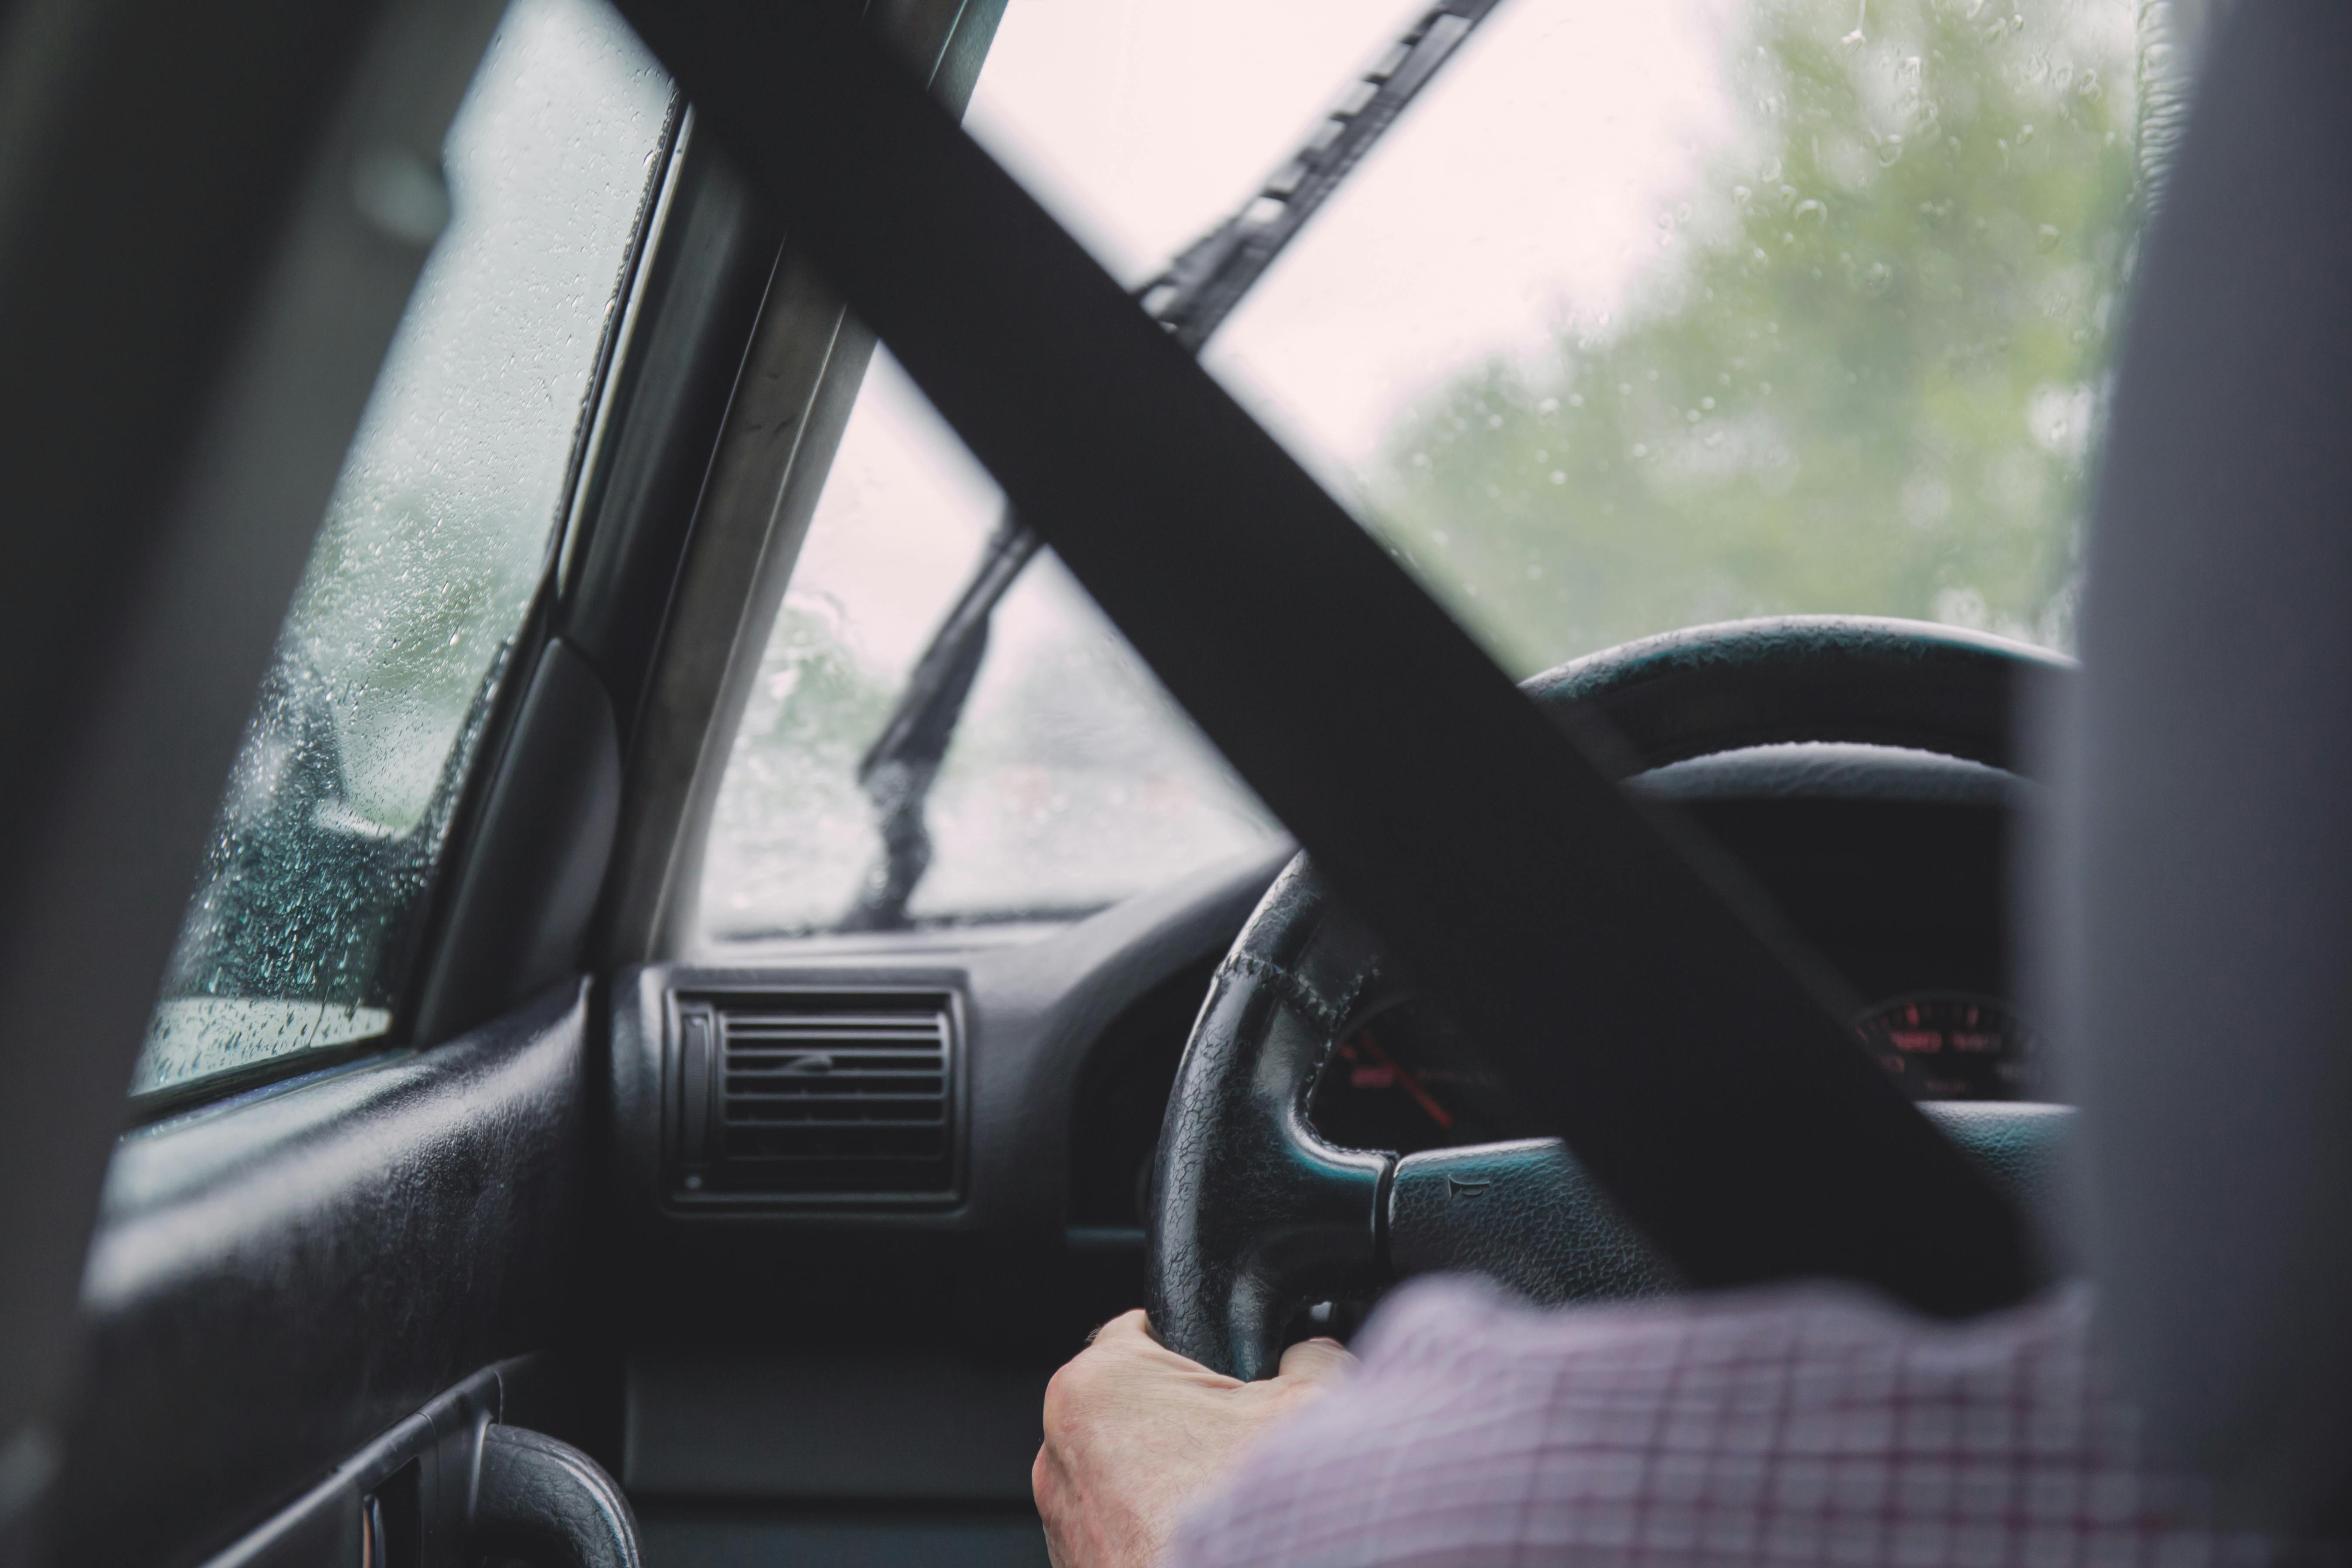 Avoid jerking the wheel while driving in rain.